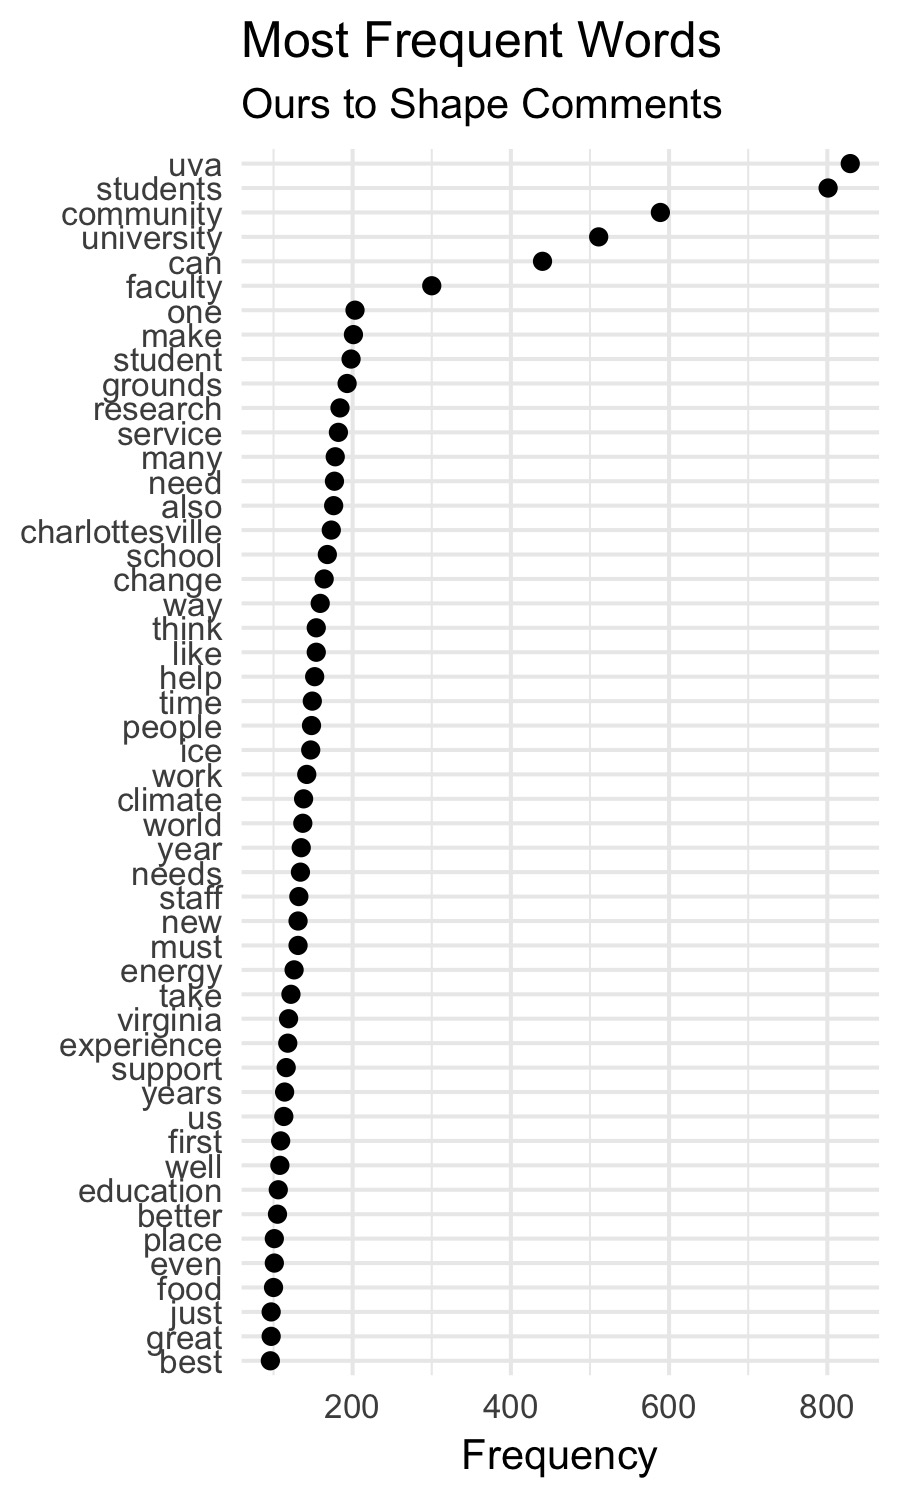 Dotplot of 50 most frequent words.